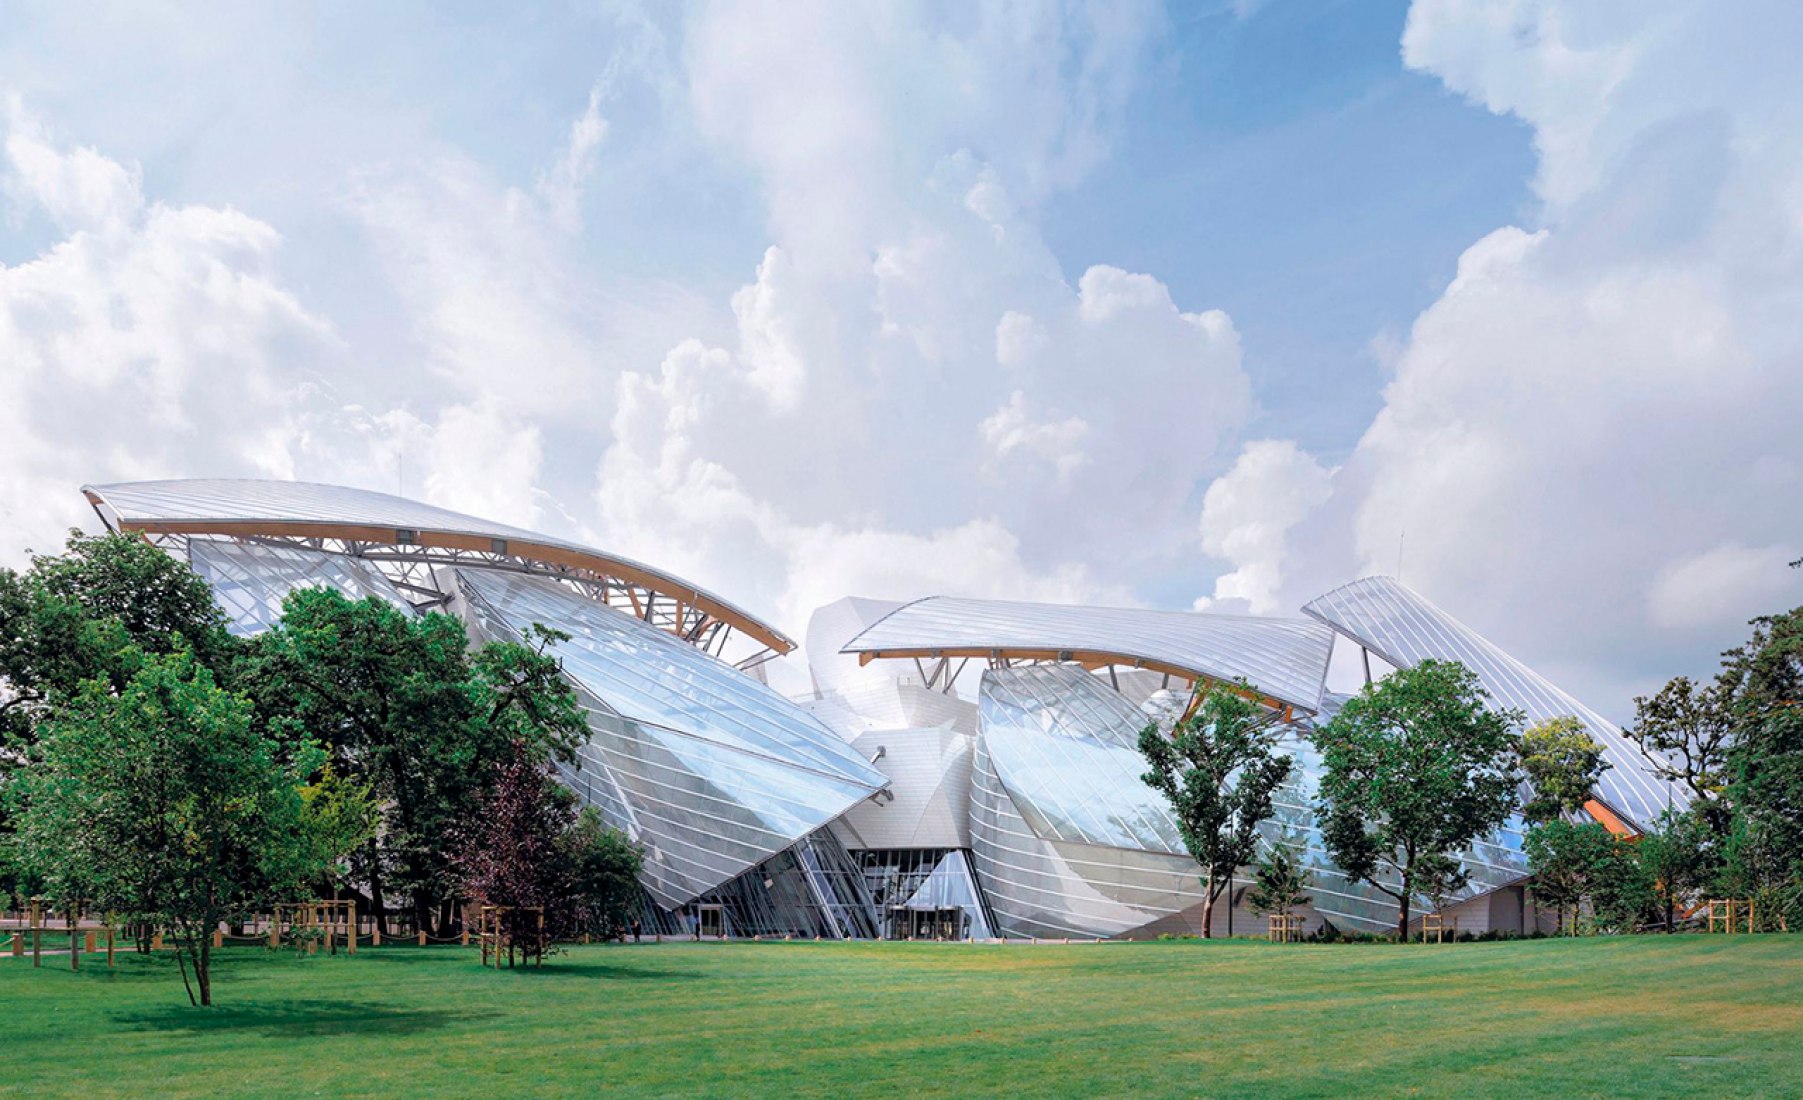 The new Foundation Louis Vuitton by Frank Gehry rises in Paris | The Strength of Architecture ...